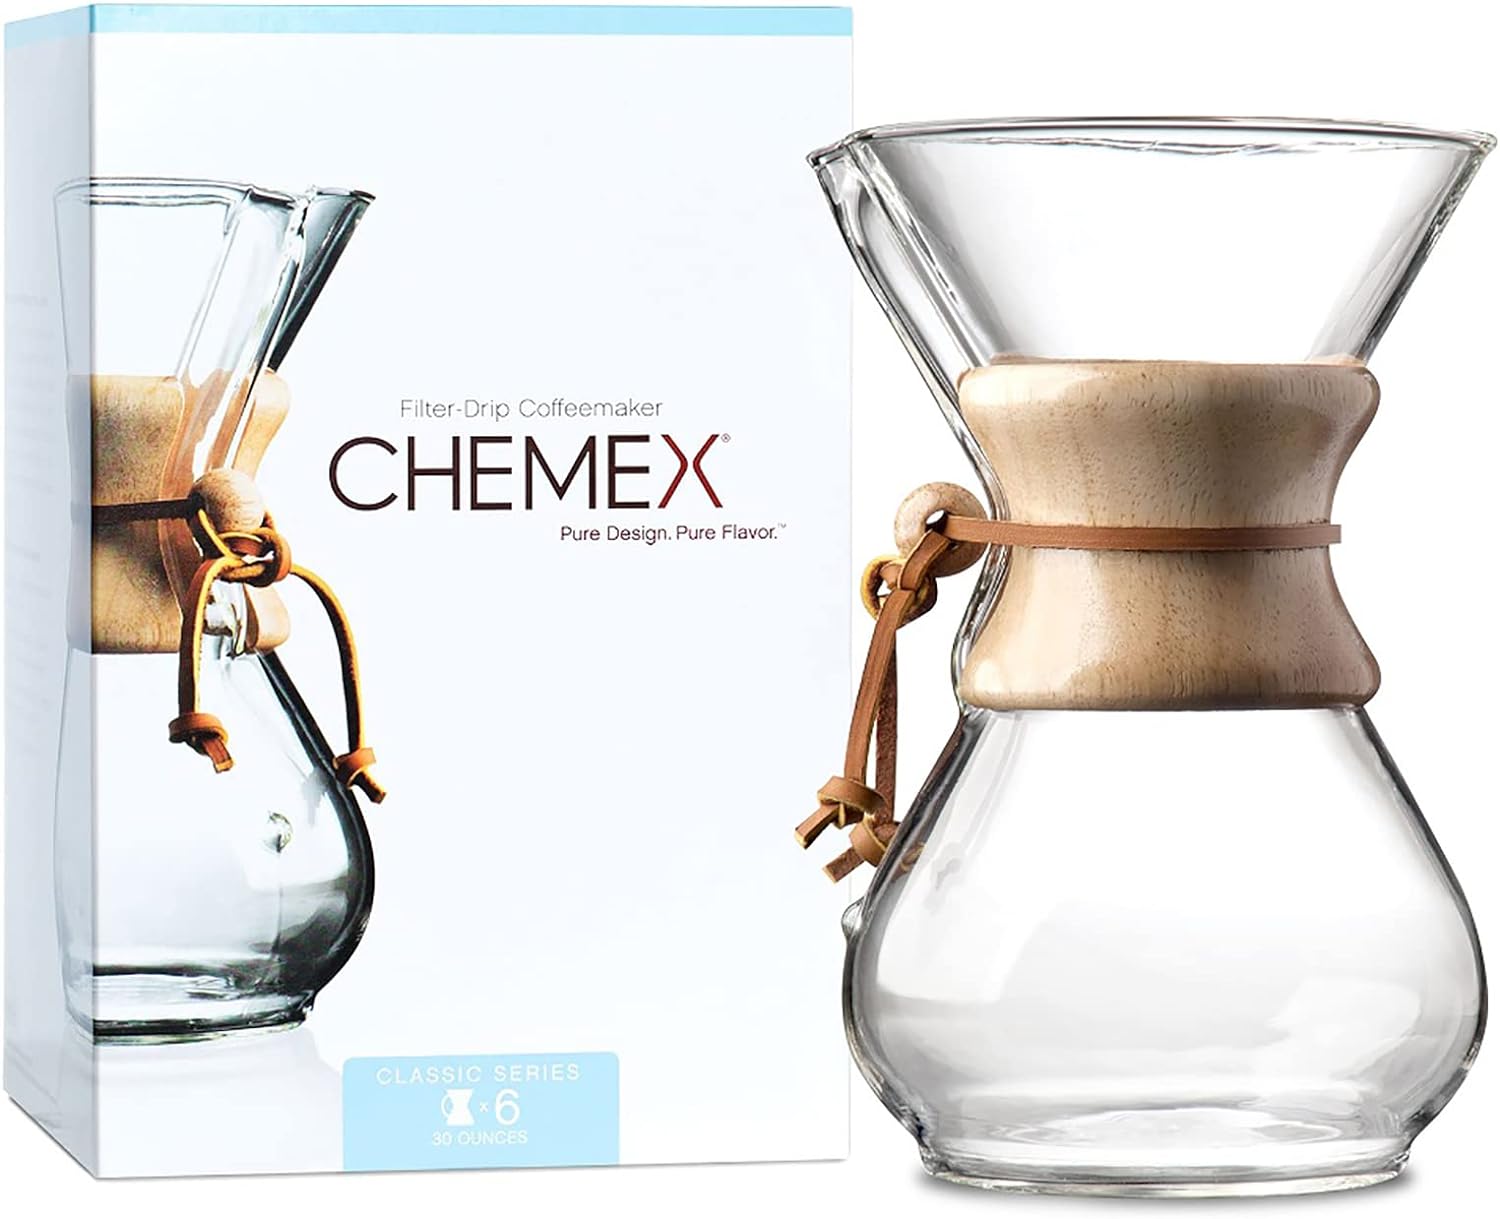 How to Clean Your Chemex. Link to Chemex coffee brewer on Amazon.